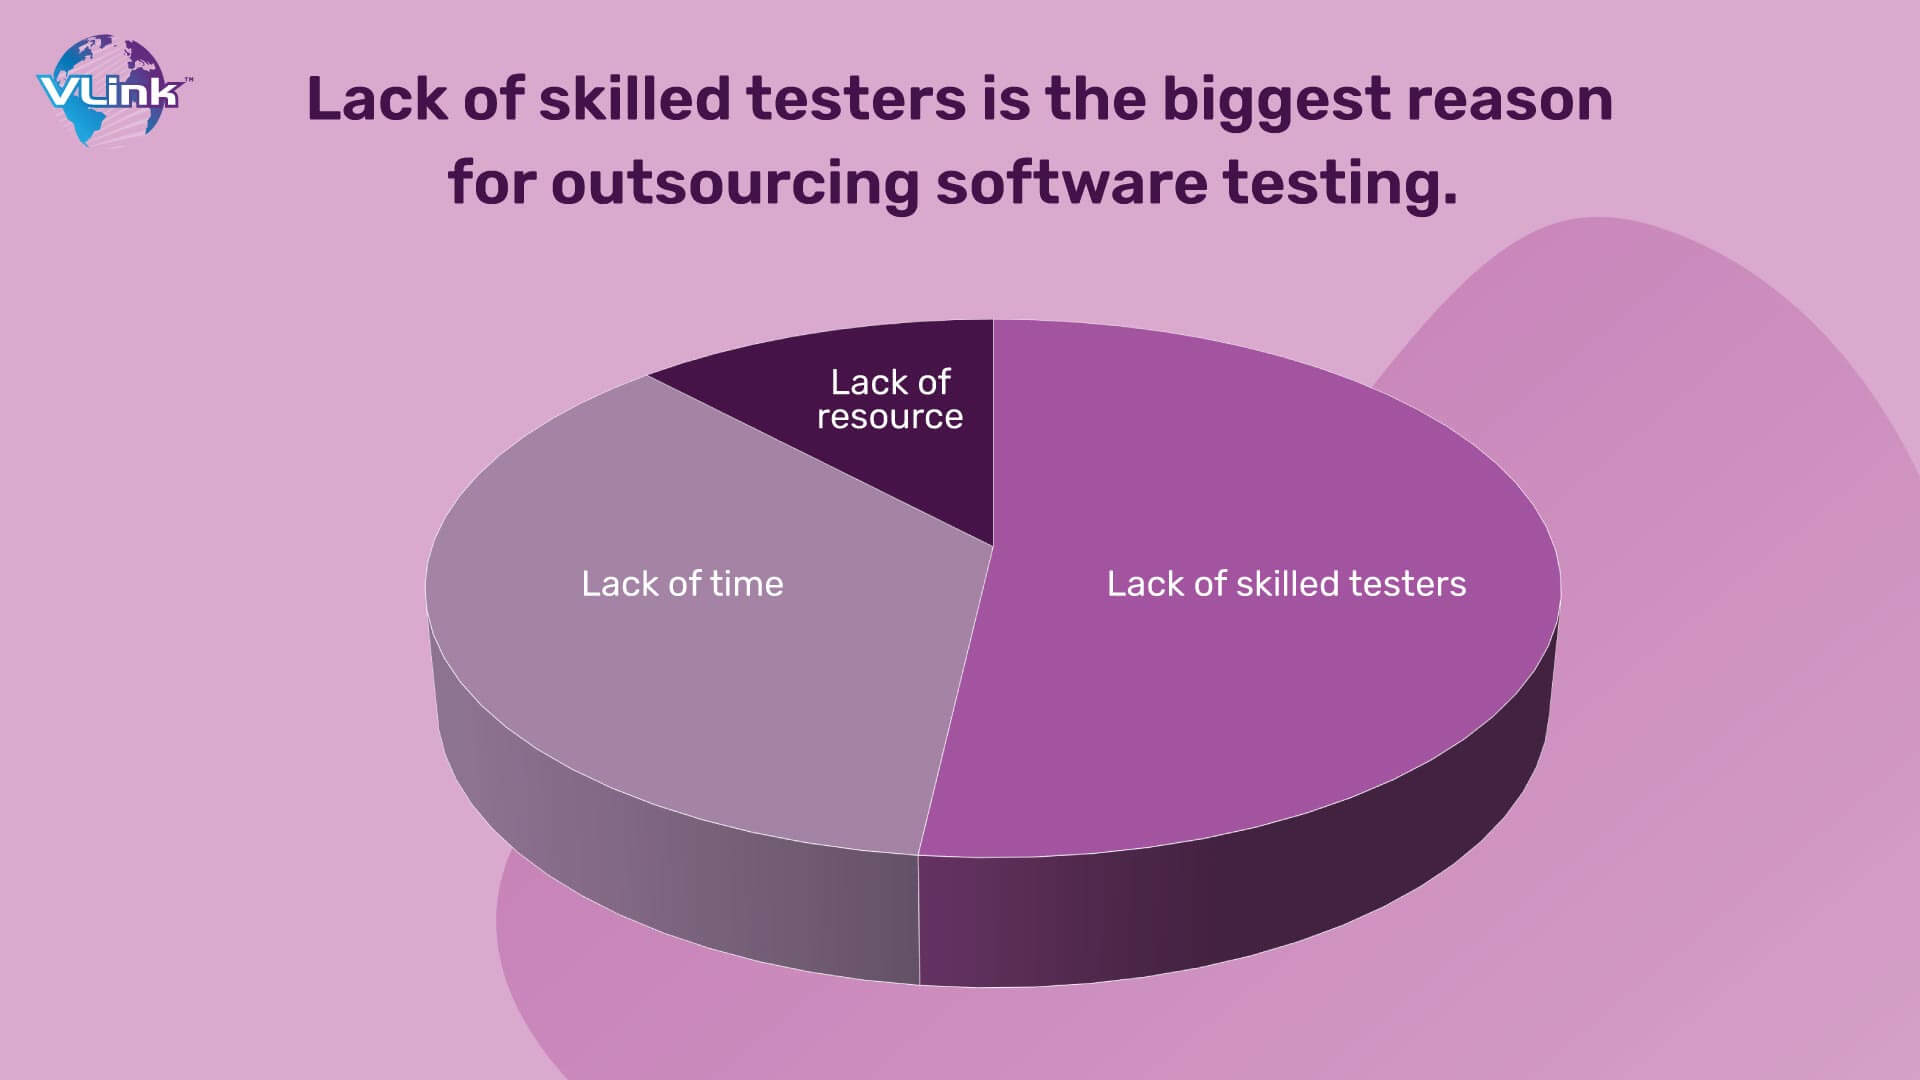 Lack of skilled testers is the biggest reason for outsourcing software testing